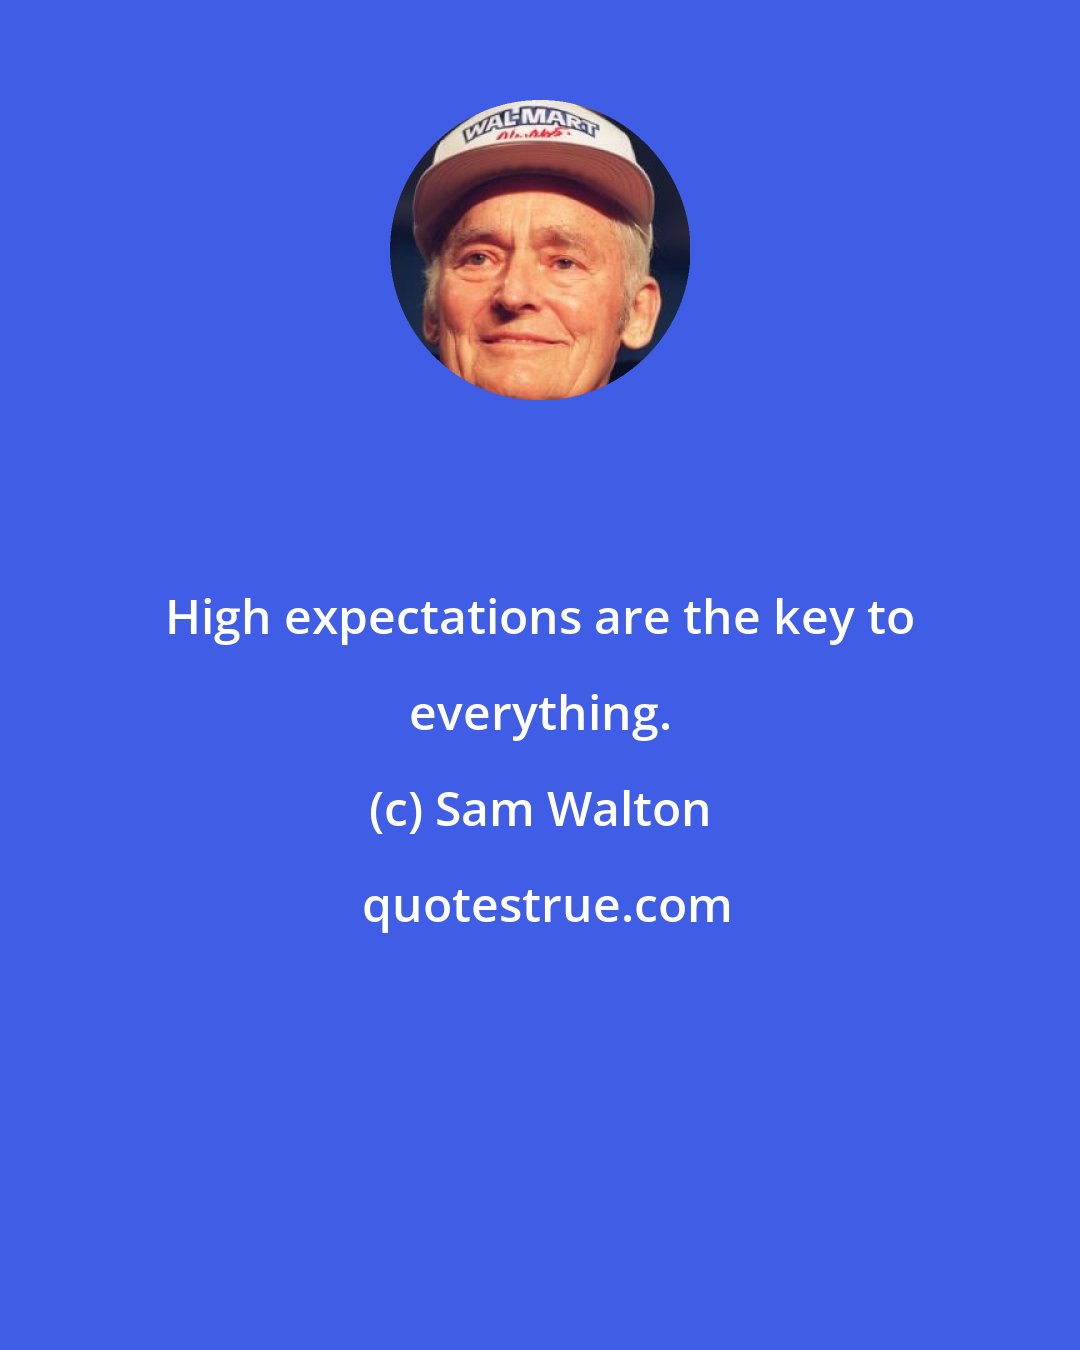 Sam Walton: High expectations are the key to everything.